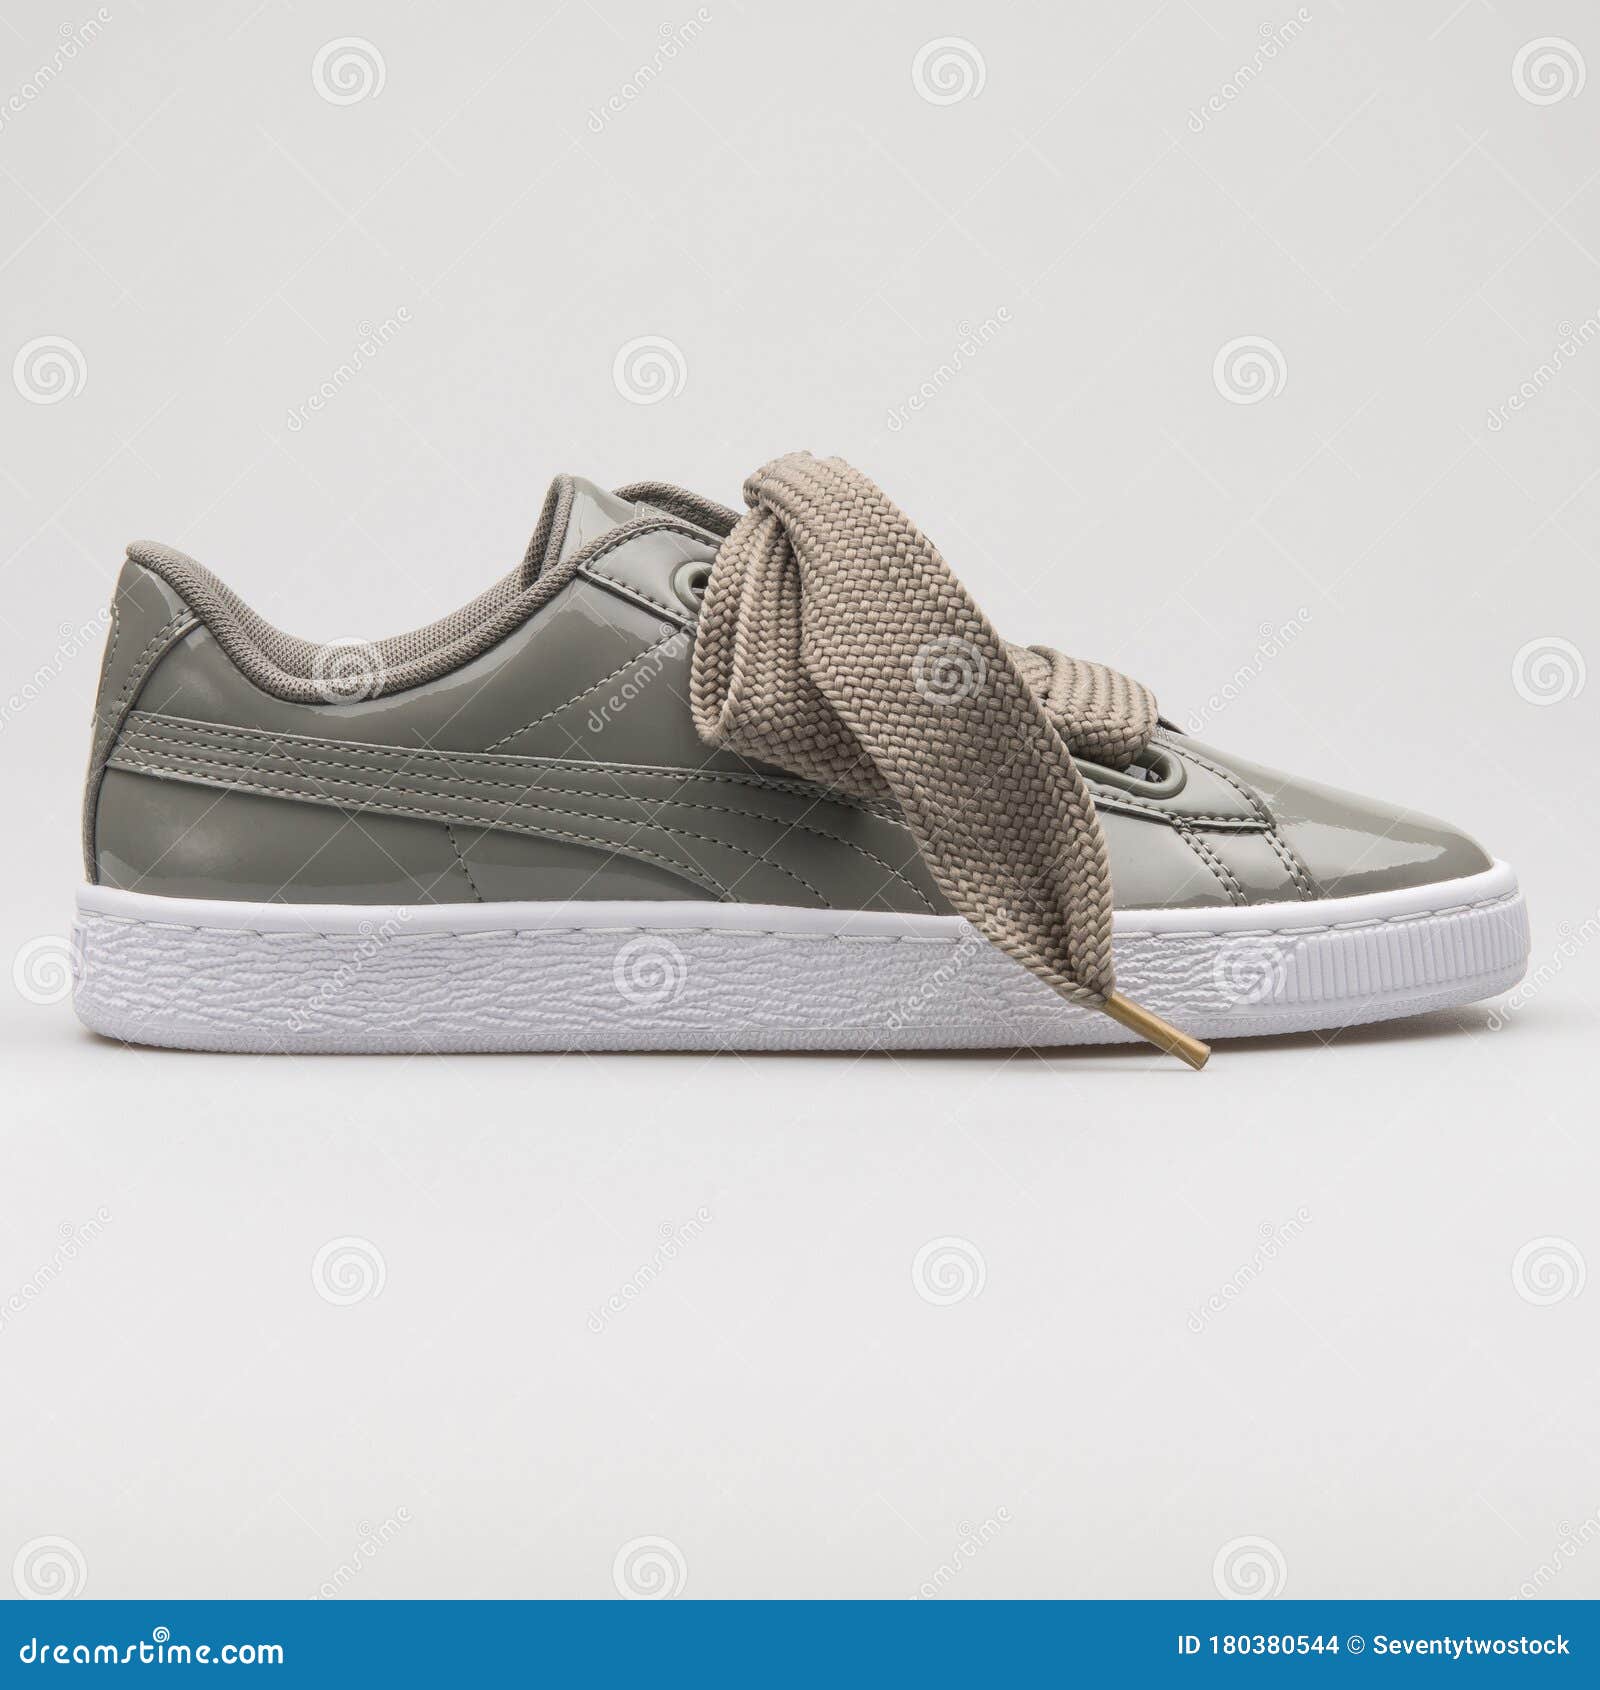 Puma Basket Heart Rock Grey and White Sneaker Editorial Stock Image - Image of shoes: 180380544